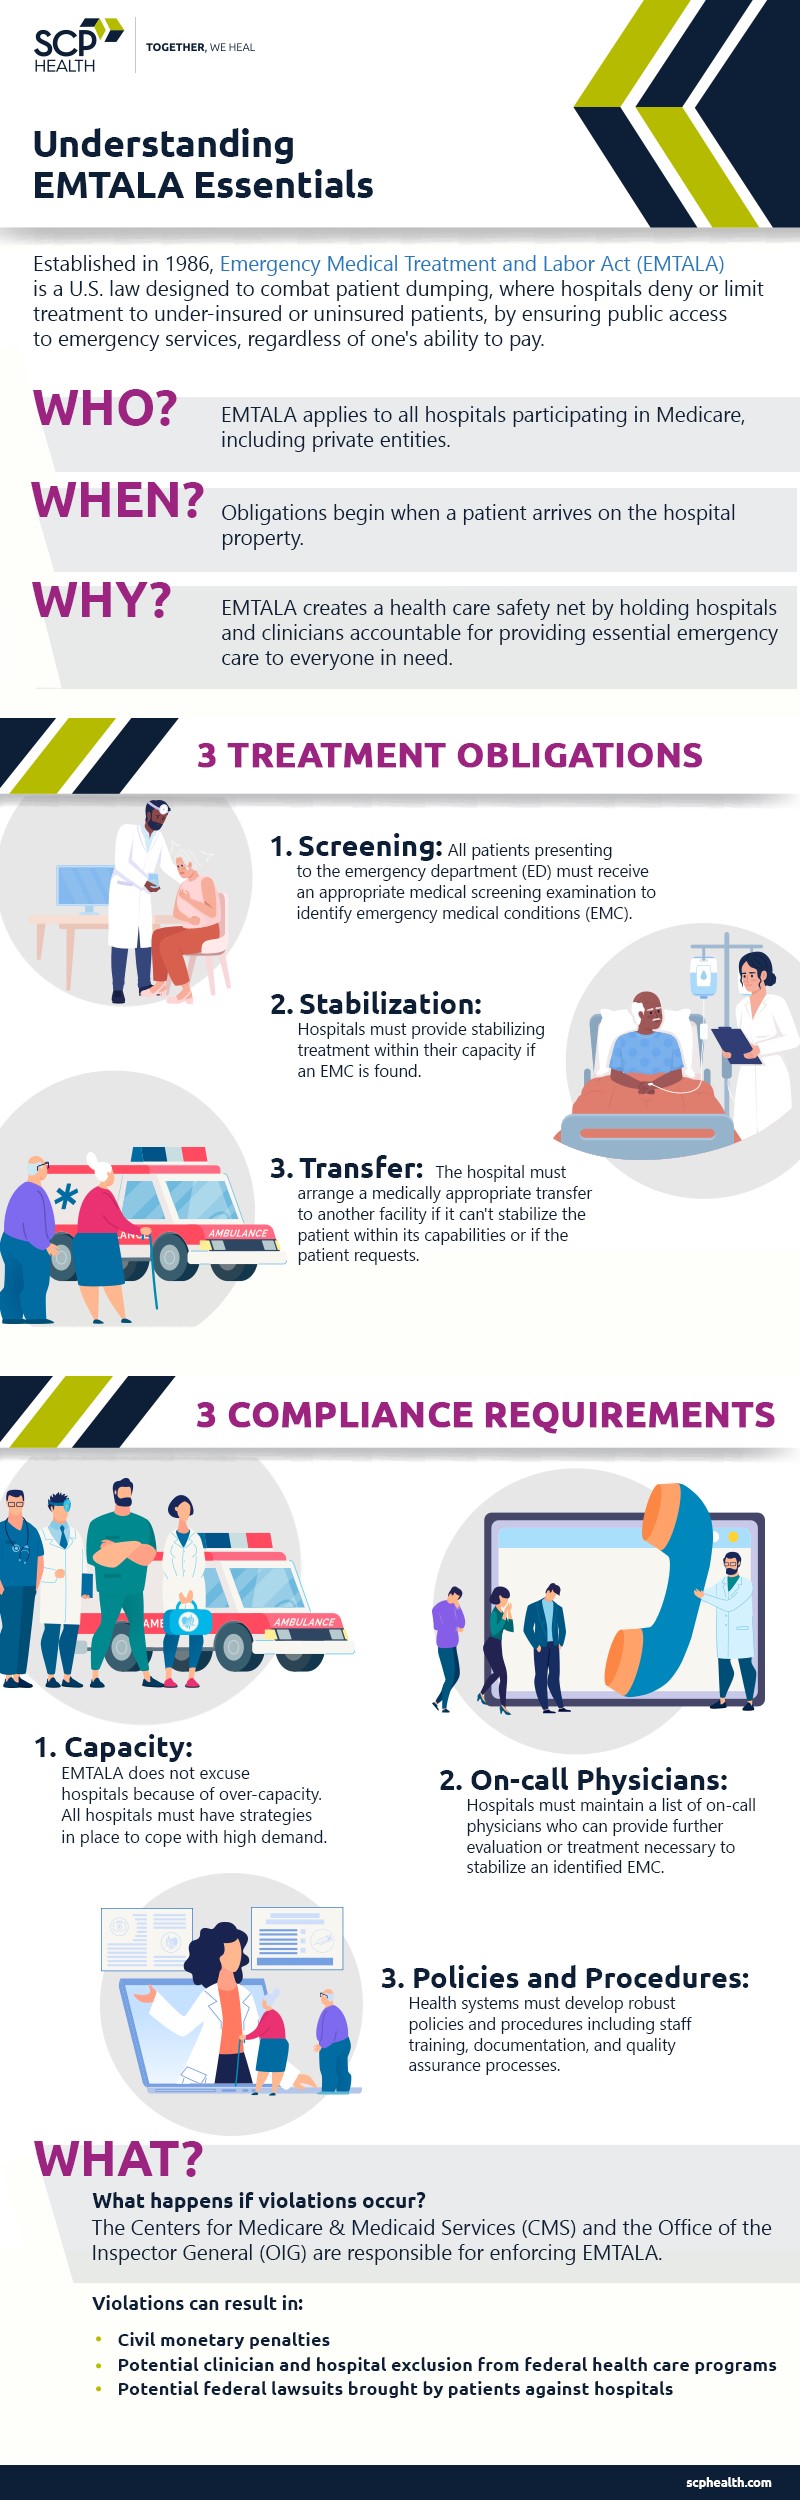 Detailed infographic outlining the who, when, why, and other details of the Emergency Medicine Treatment and Labor Act